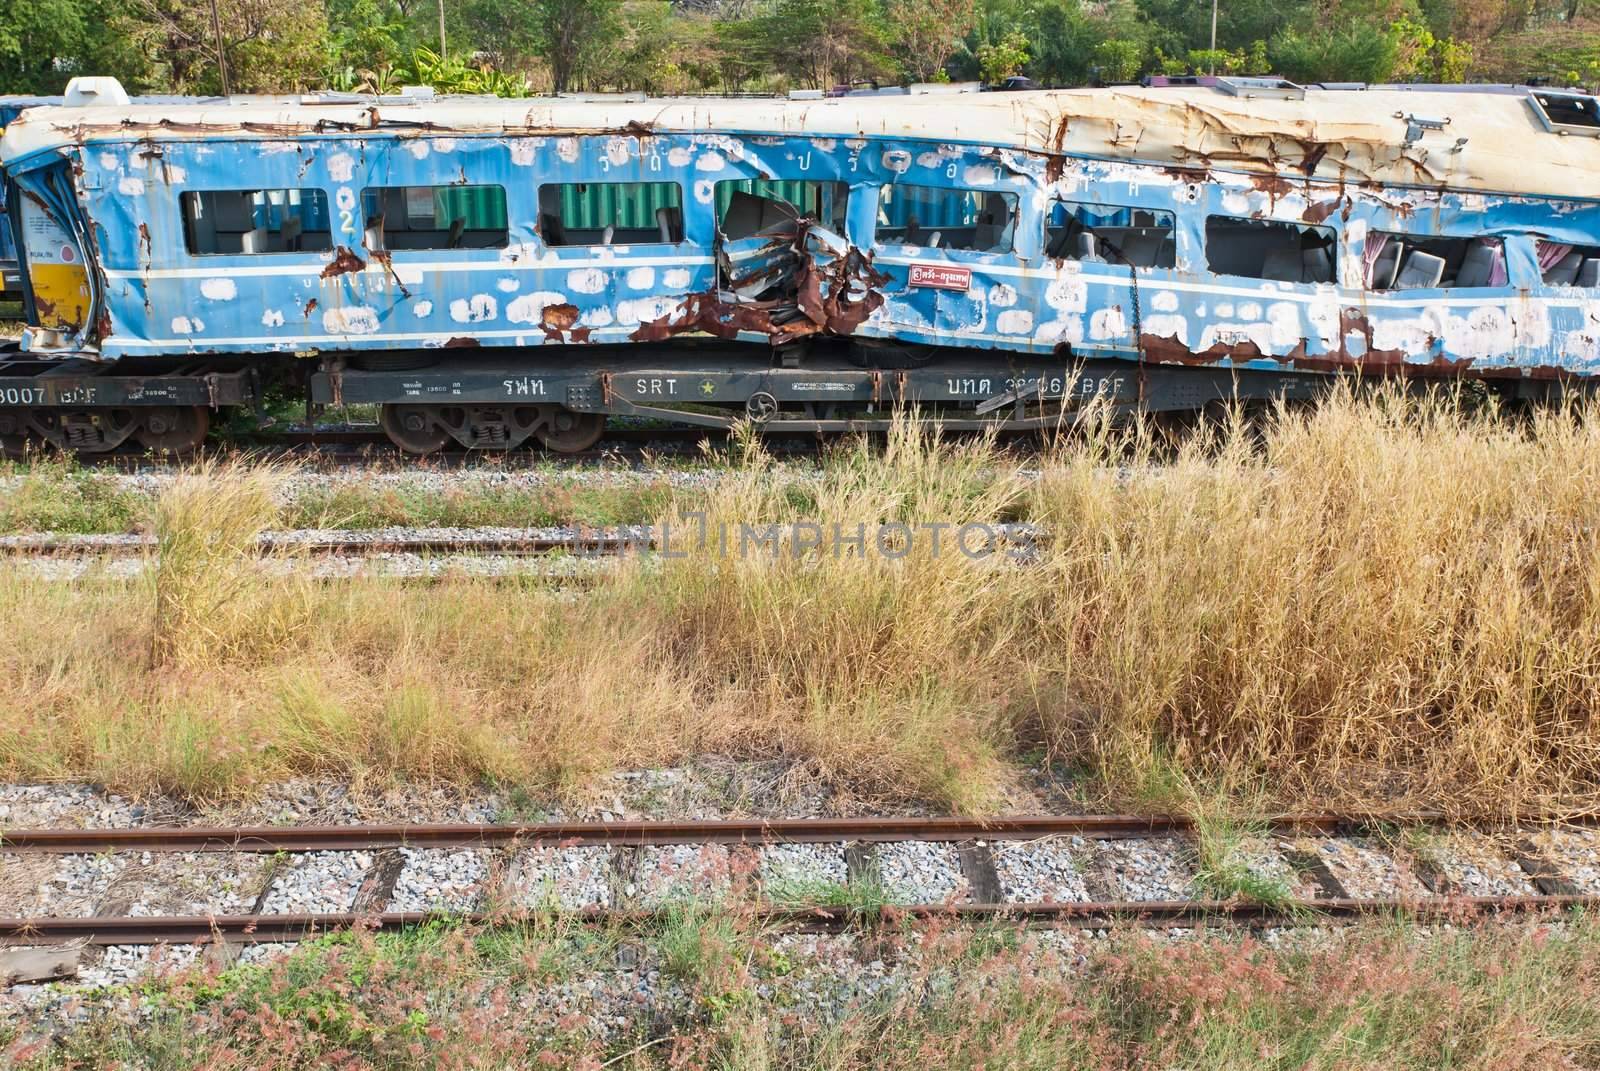 A wreckage of crashed or damaged train taken from train yard by sasilsolutions